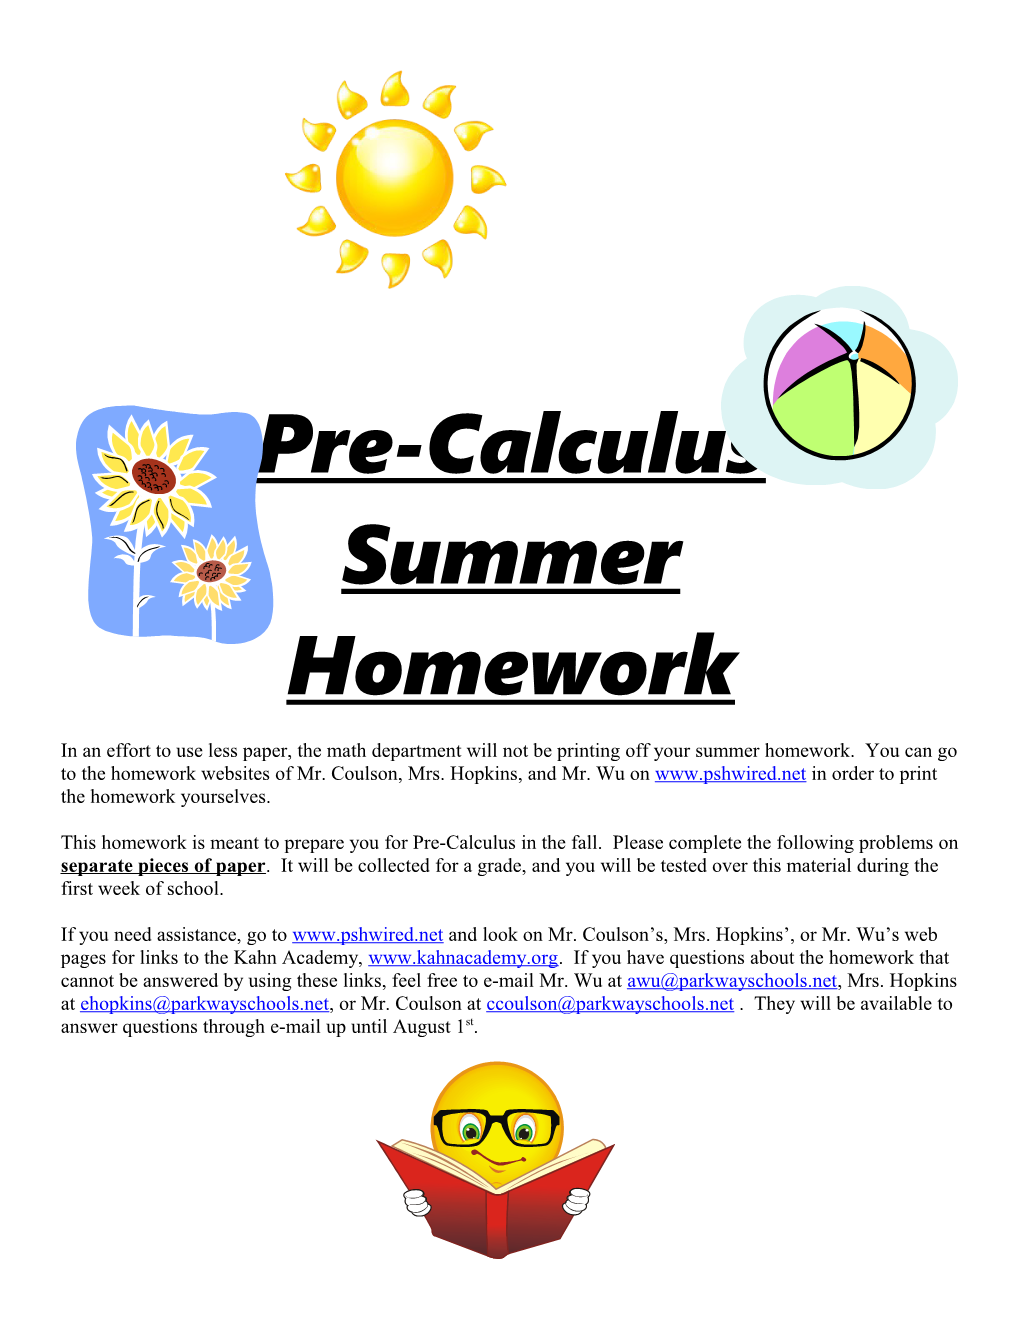 In an Effort to Use Less Paper, the Math Department Will Not Be Printing Off Your Summer